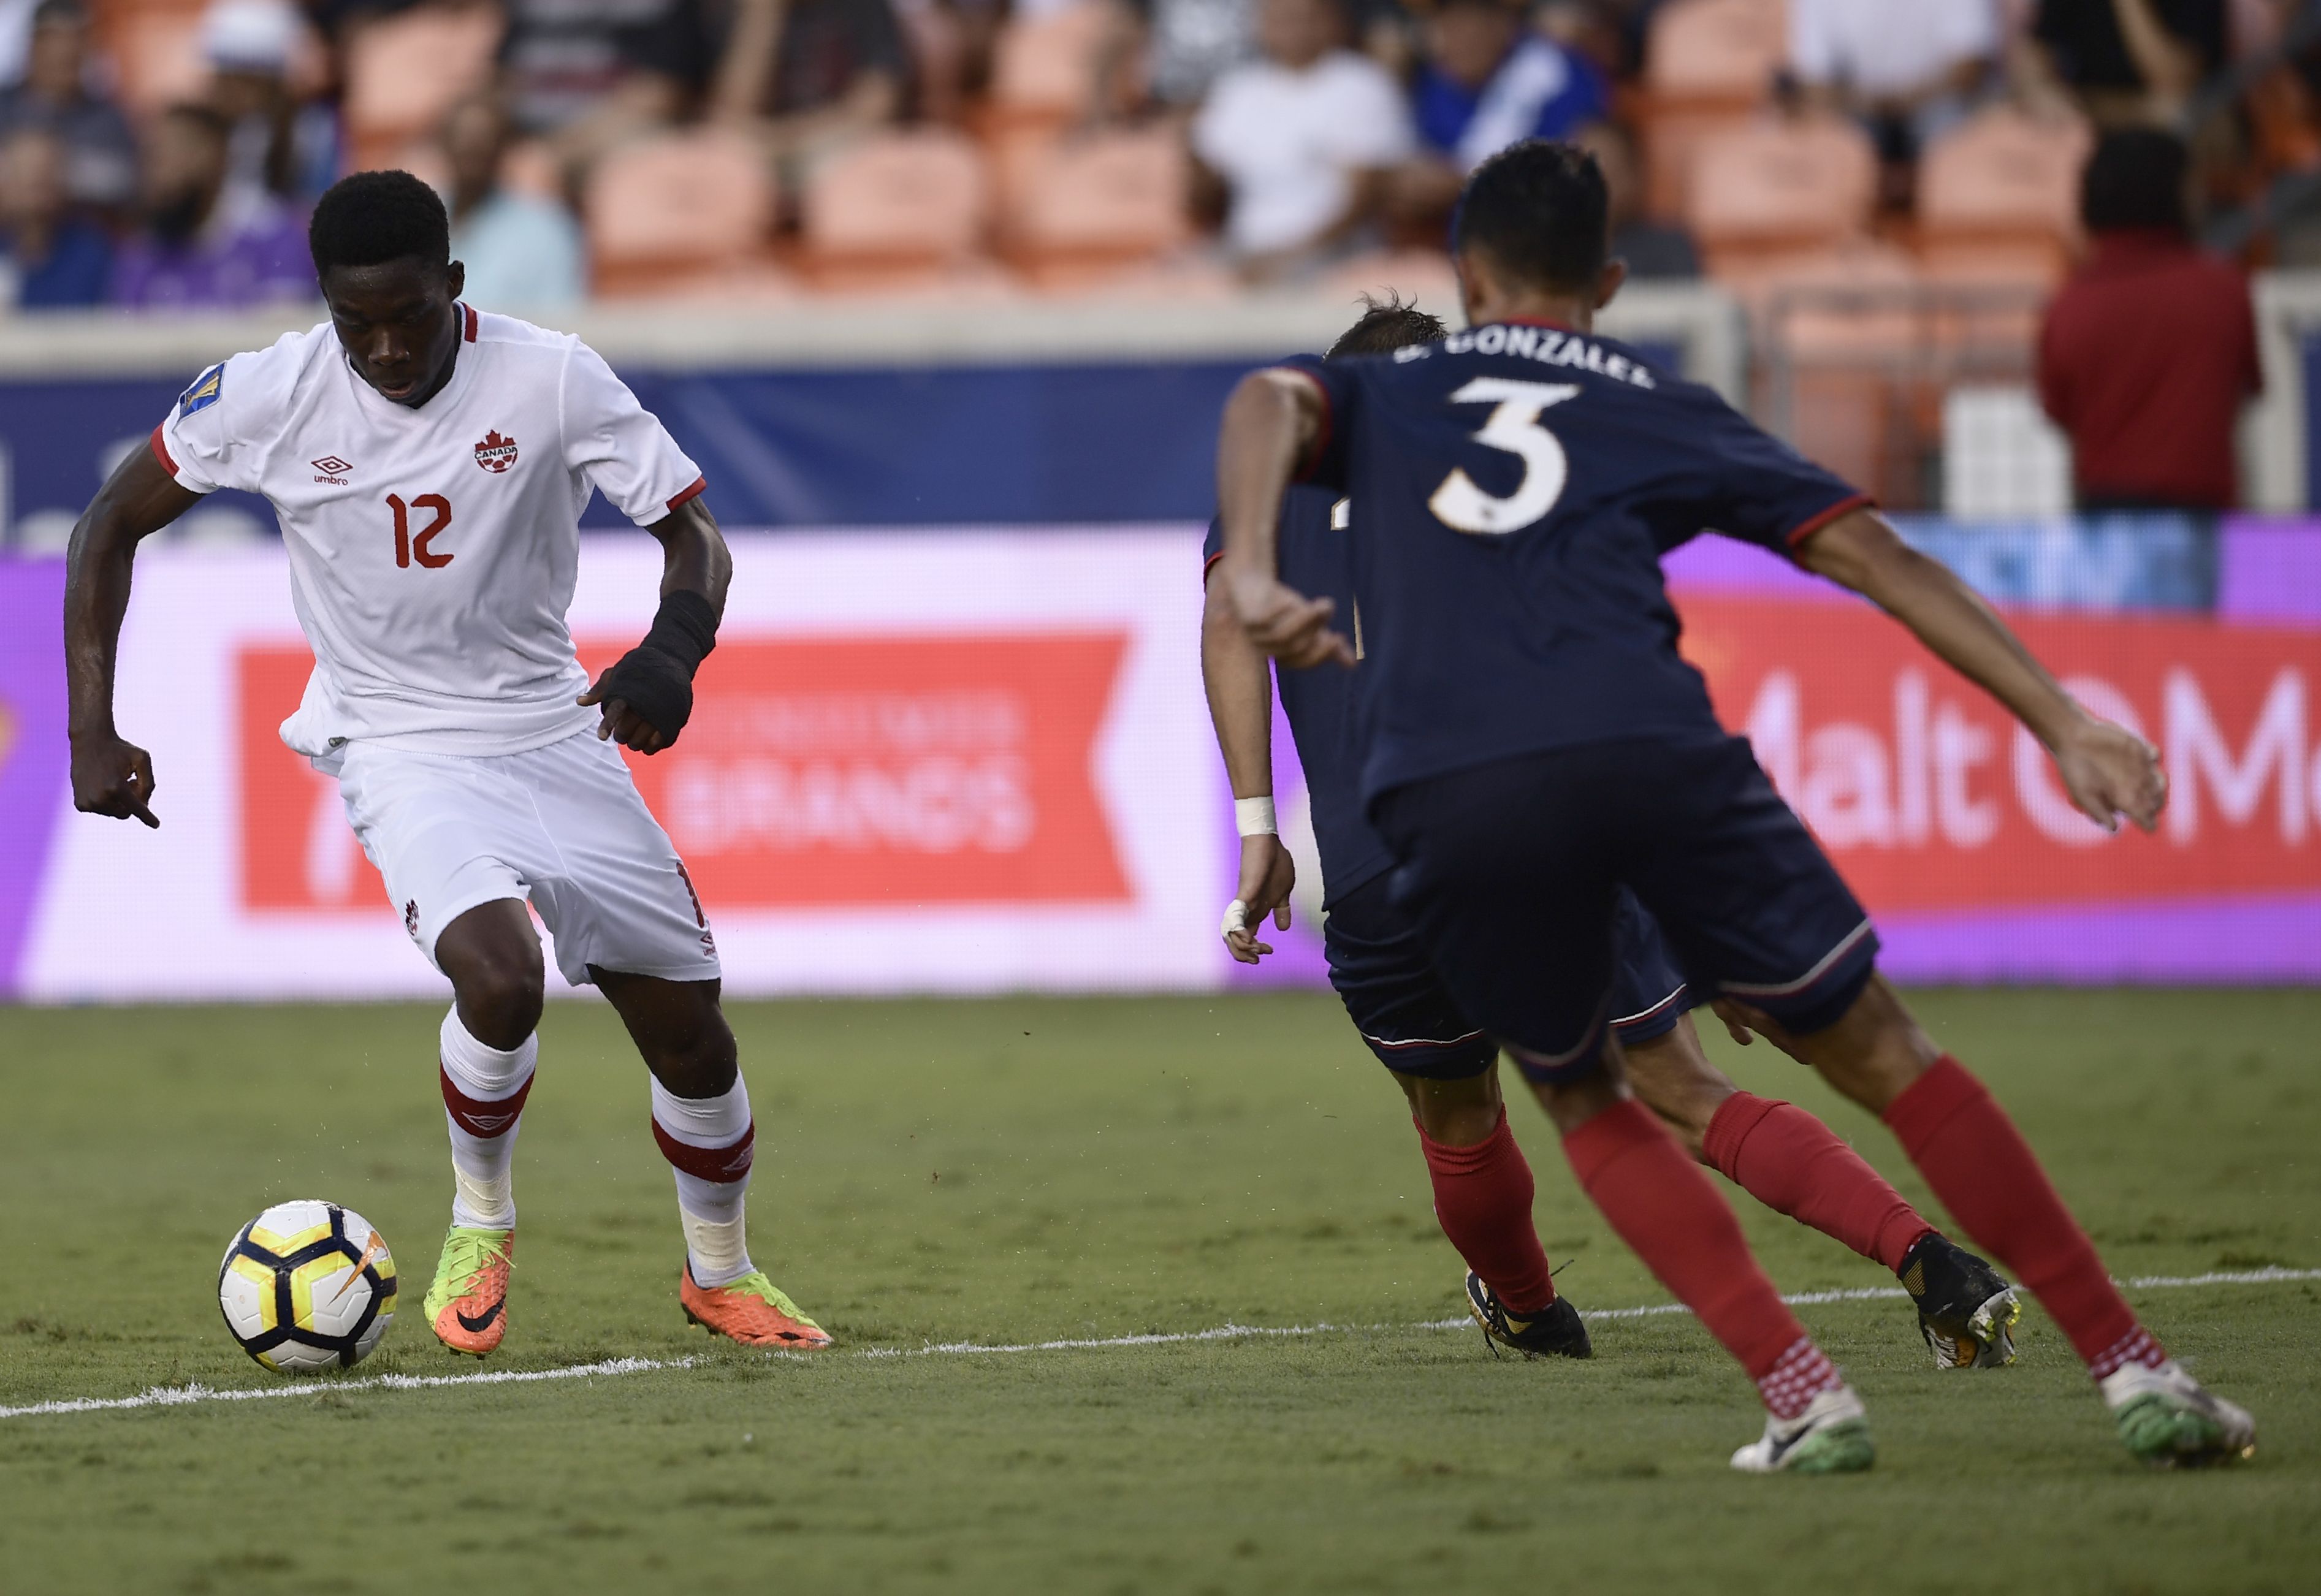 Canada's midfielder Alphonso Davies (L) kicks the ball during the Costa Rica vs. Canada 2017 CONCACAF Gold Cup match at the BBVA Compass Stadium July 11, 2017 in Houston, Texas. / AFP PHOTO / Brendan Smialowski (Photo credit should read BRENDAN SMIALOWSKI/AFP/Getty Images)